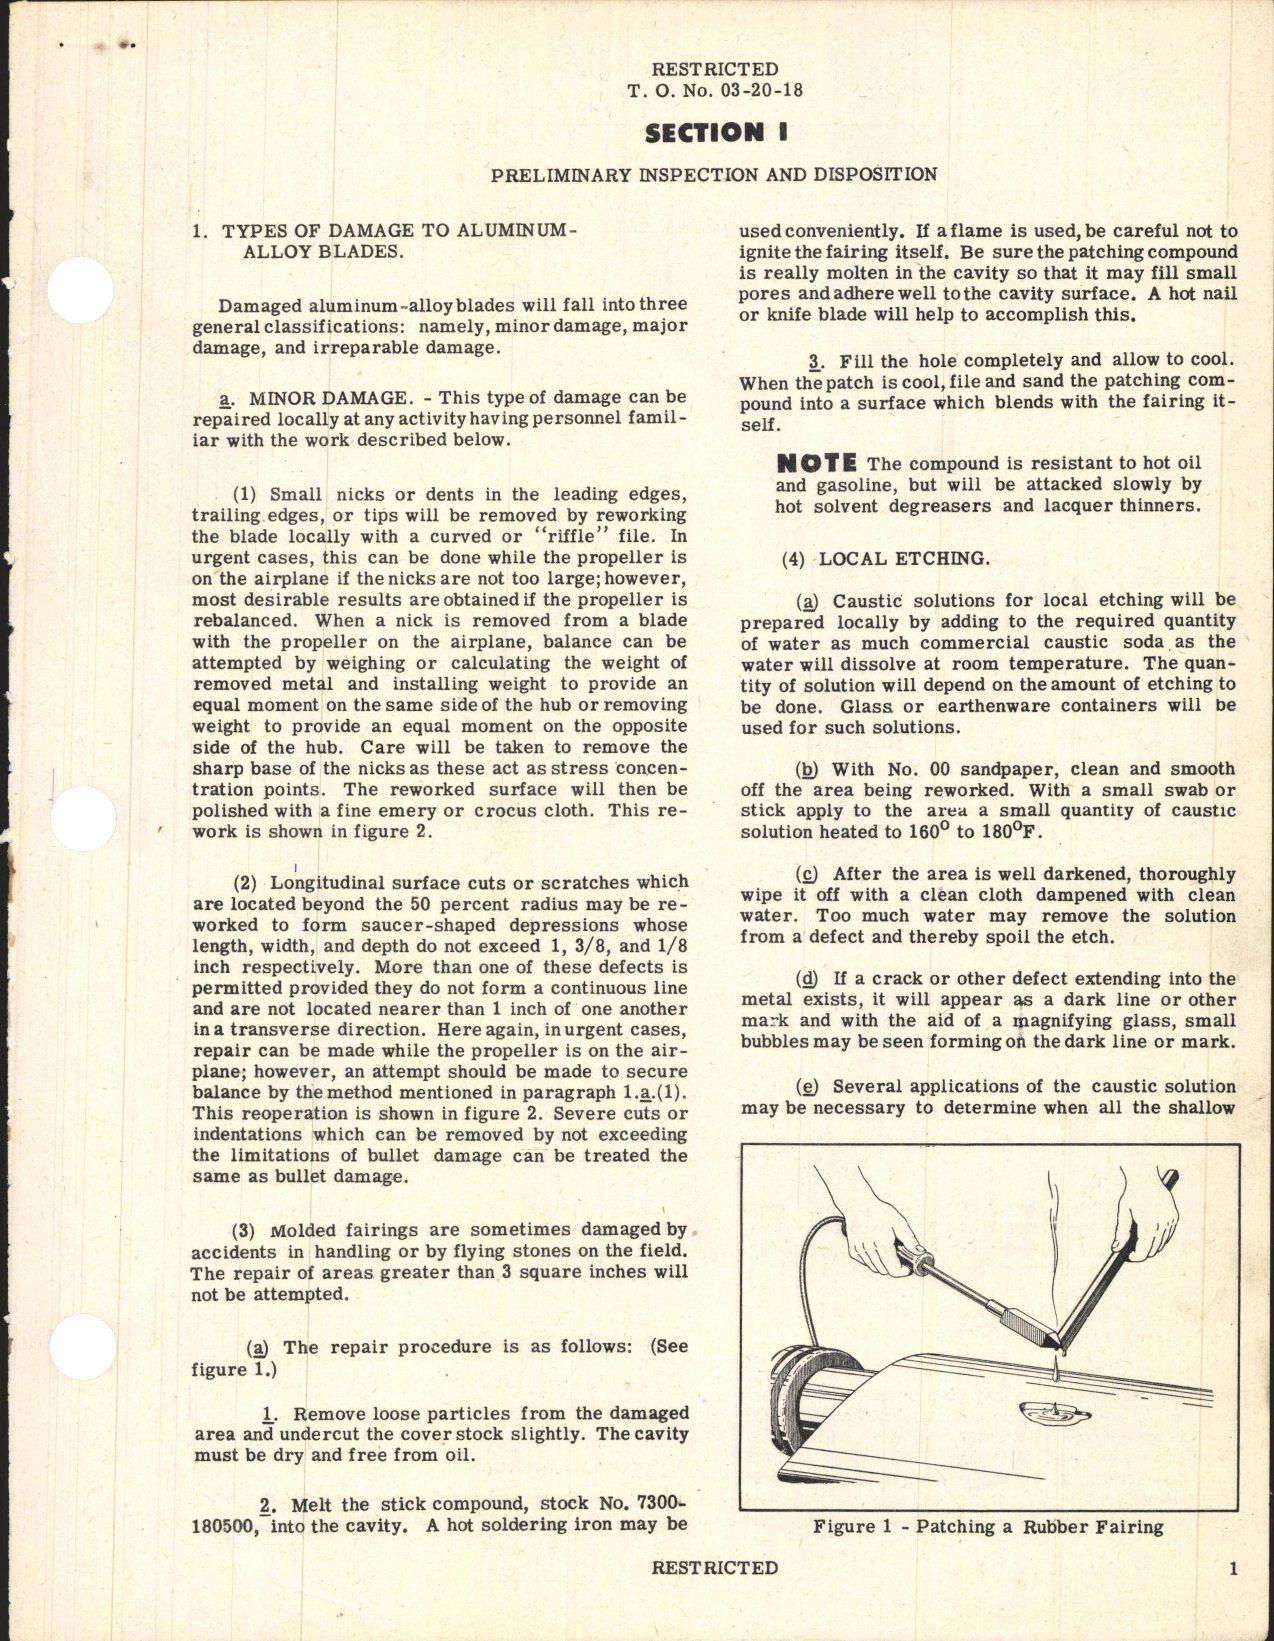 Sample page 5 from AirCorps Library document: Propellers and Accessories; Inspection, Repair, and Disposition of Damaged Aluminum-Alloy Propeller Blades